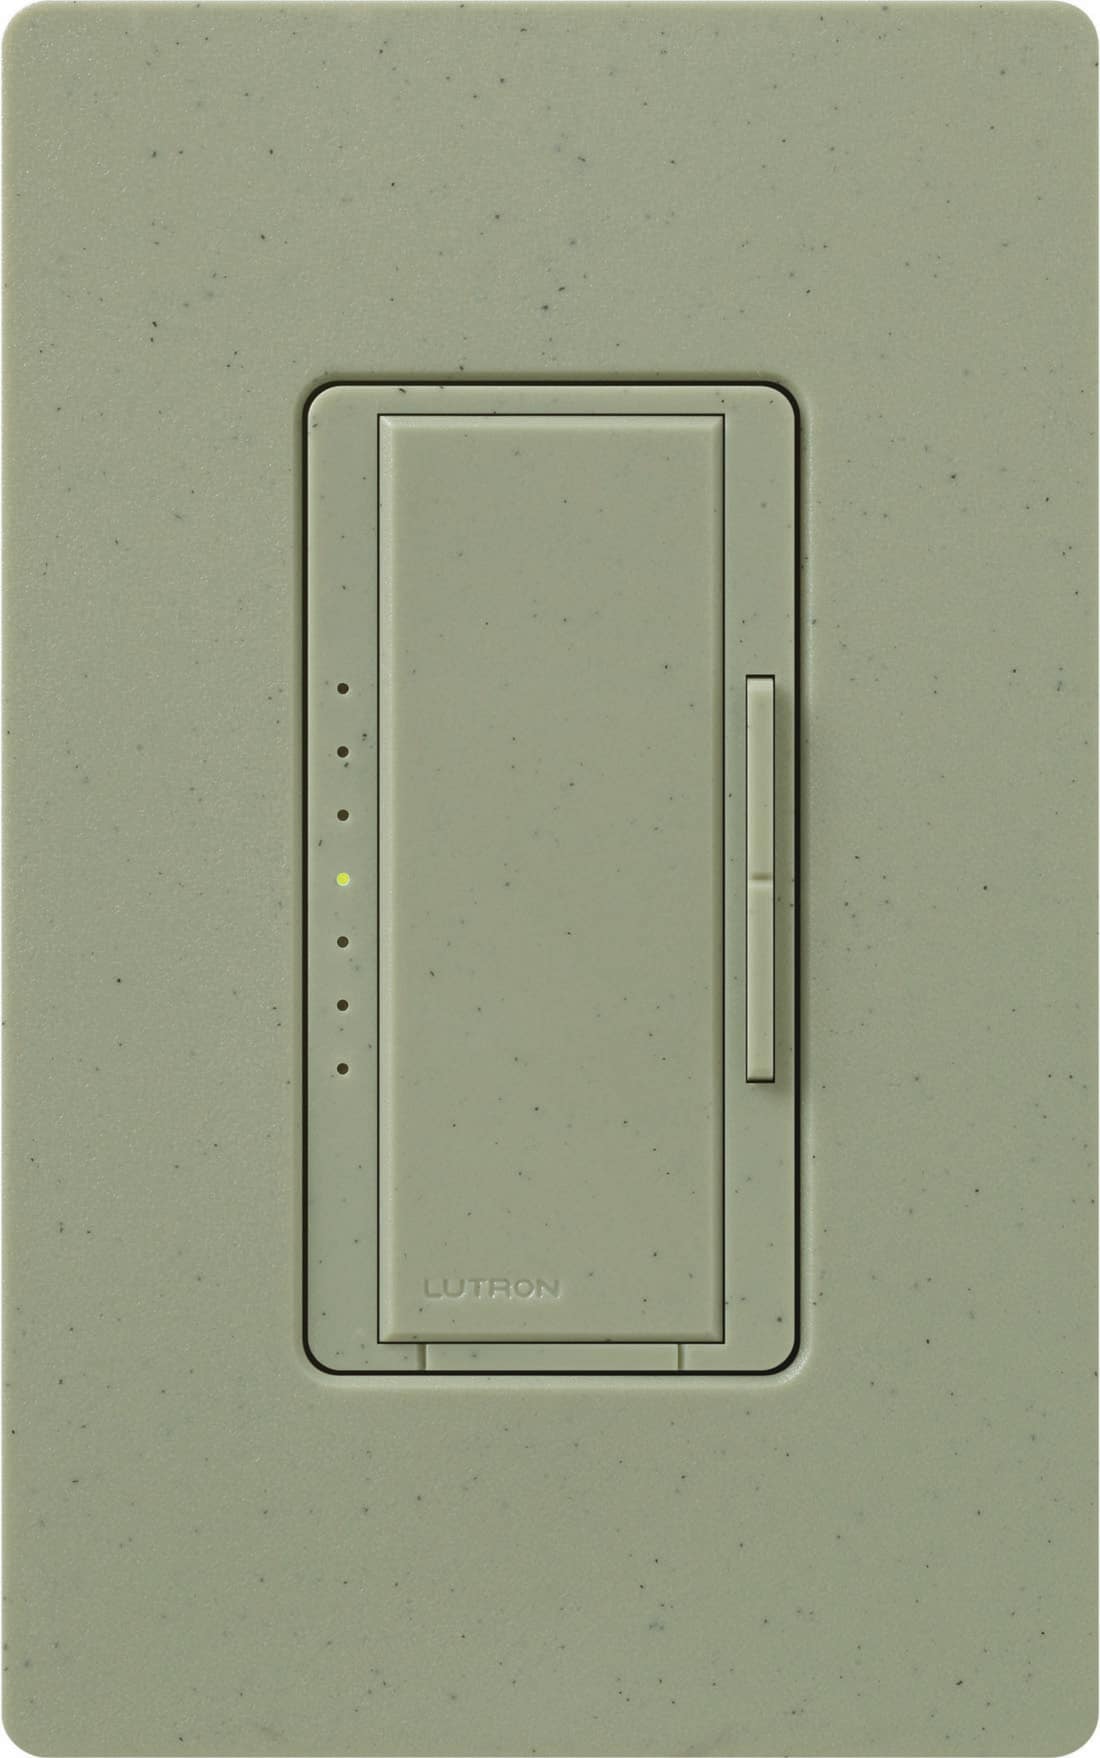 Lutron Diva Multi-location Decorator Light Dimmer Switch, Greenbriar in the Dimmers department at Lowes.com